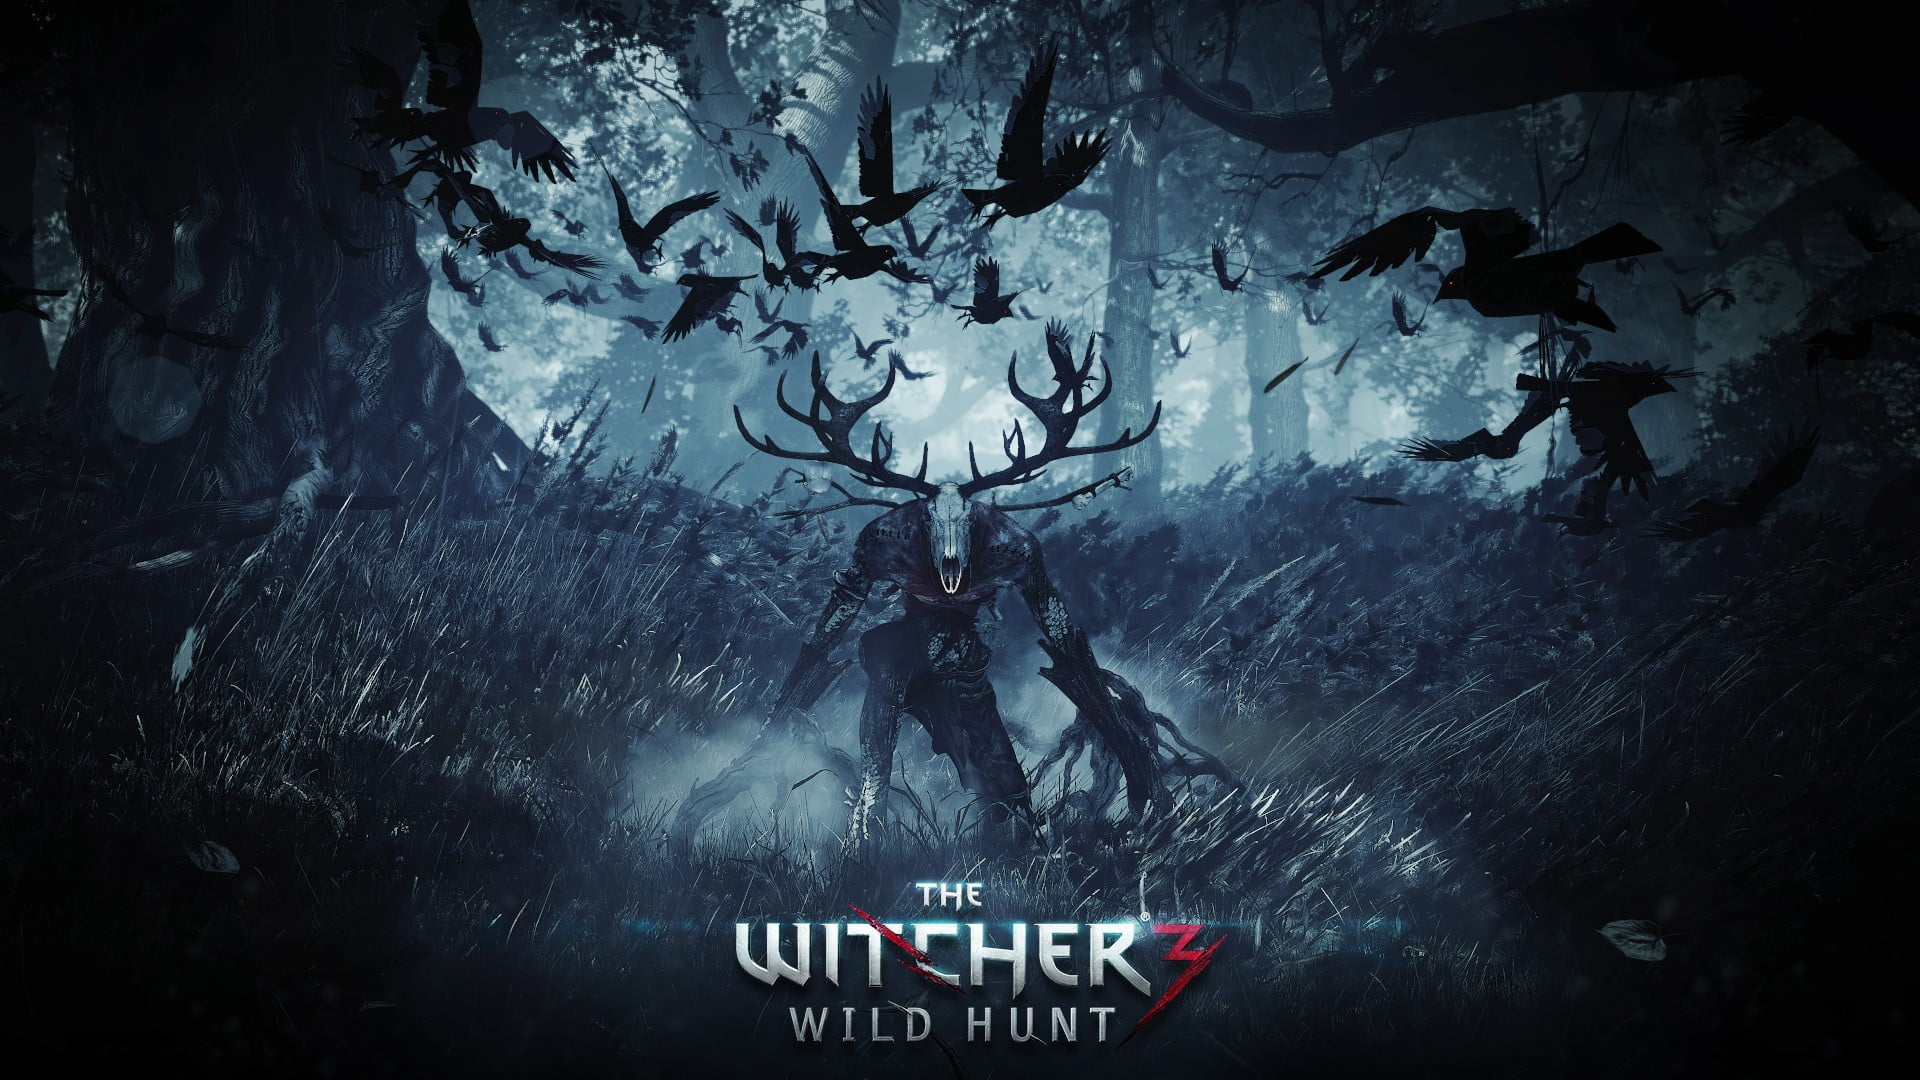 The Witcher 3 Wild hunt wallpaper, video games, The Witcher 3: Wild Hunt